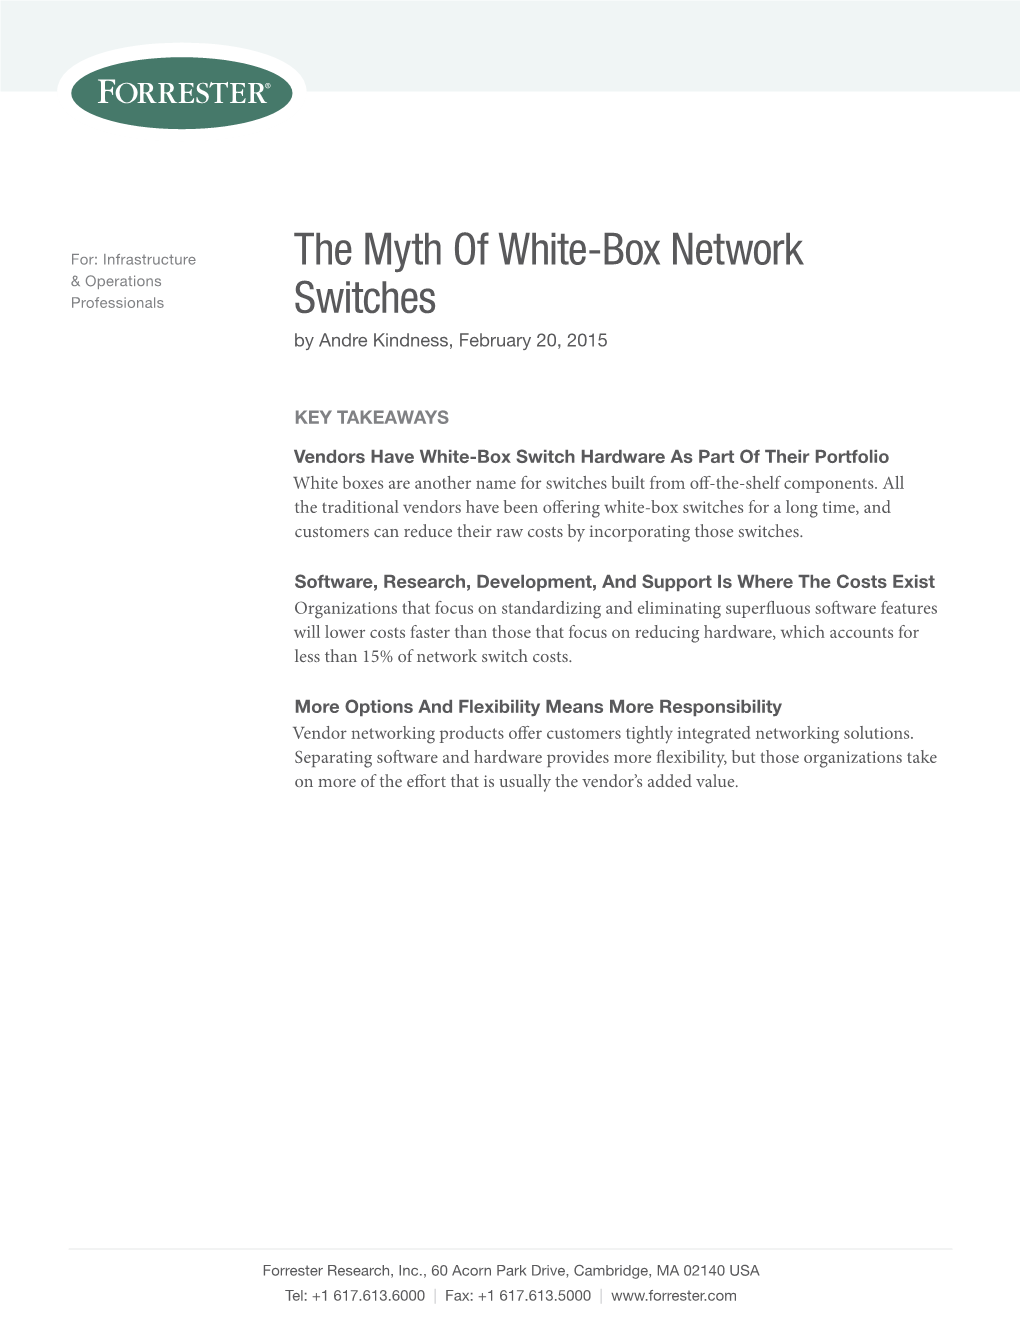 The Myth of White-Box Network Switches